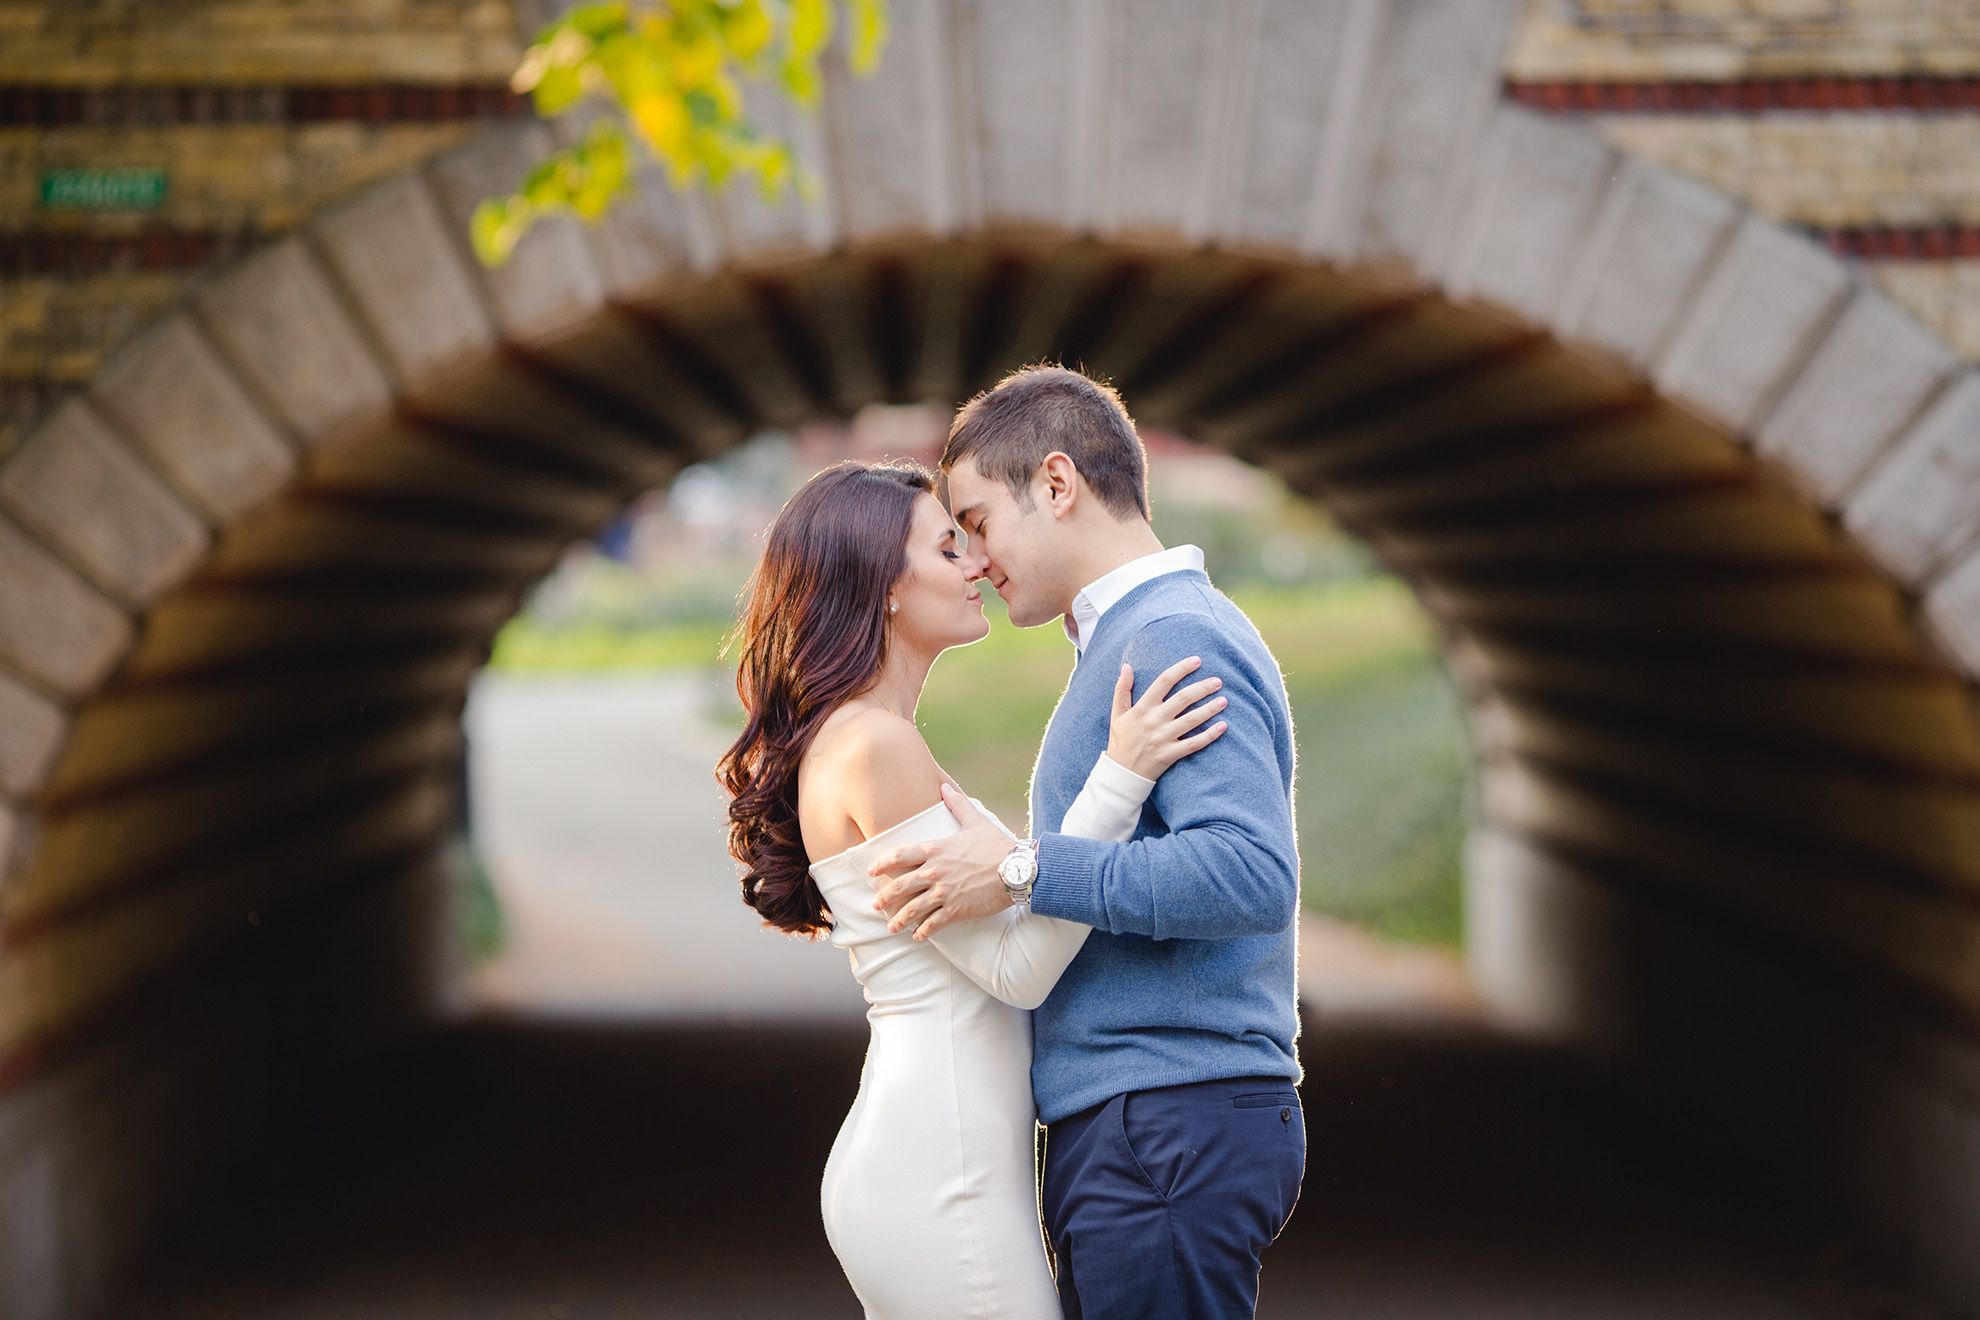 Image of an engaged couple embracing in front of a stone tunnel